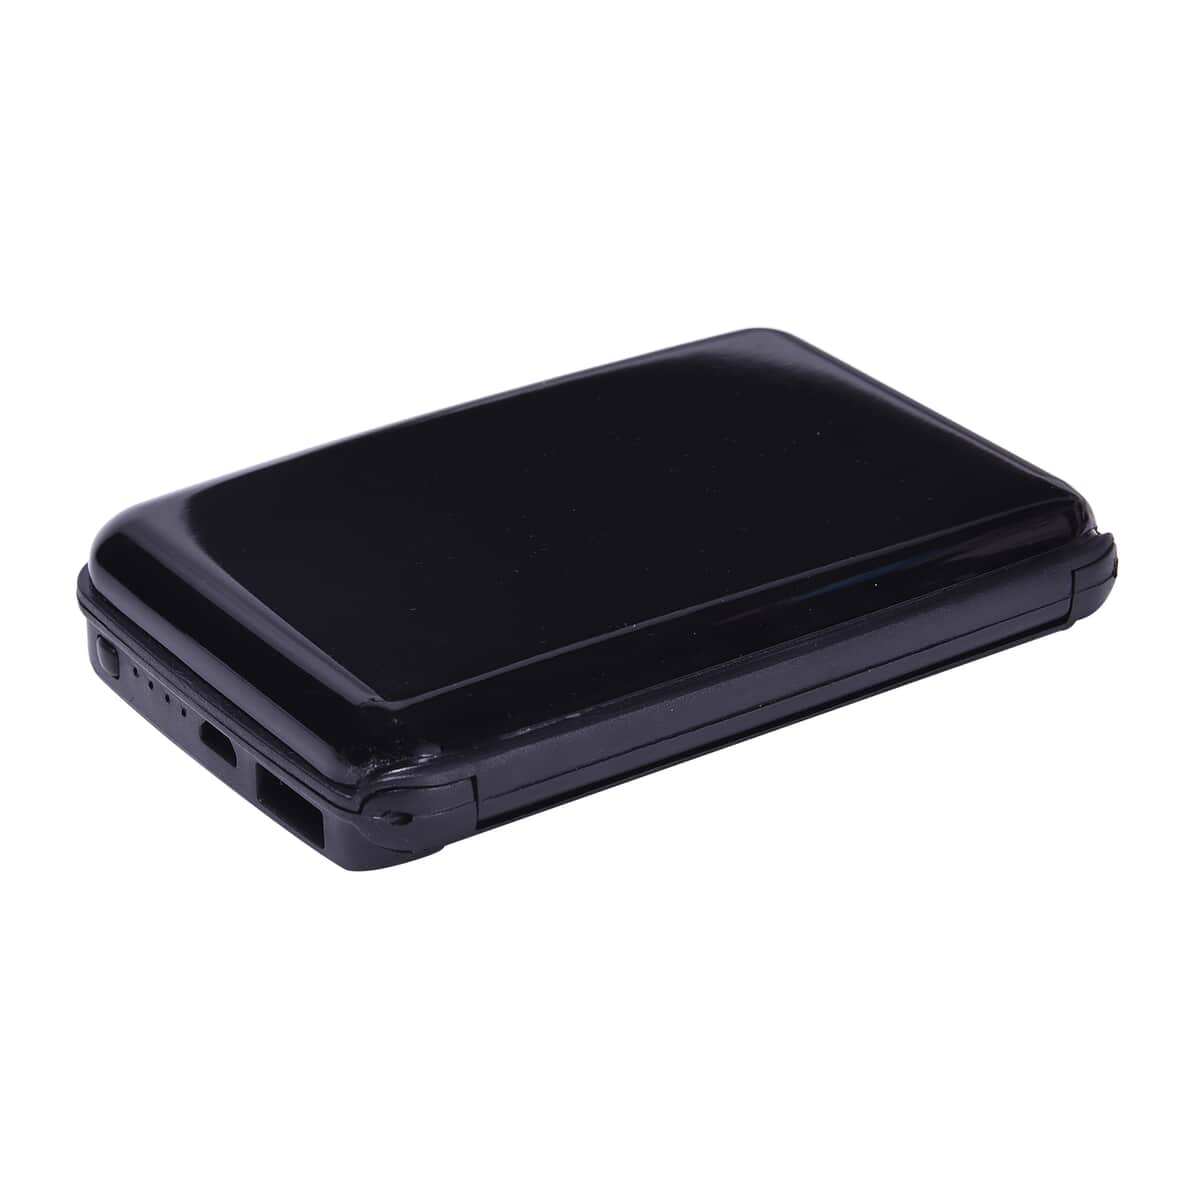 Homesmart 2-in-1 Black RFID Wallet with 1800mAH Power Bank & USB Cable (To Charge Power Bank) image number 3